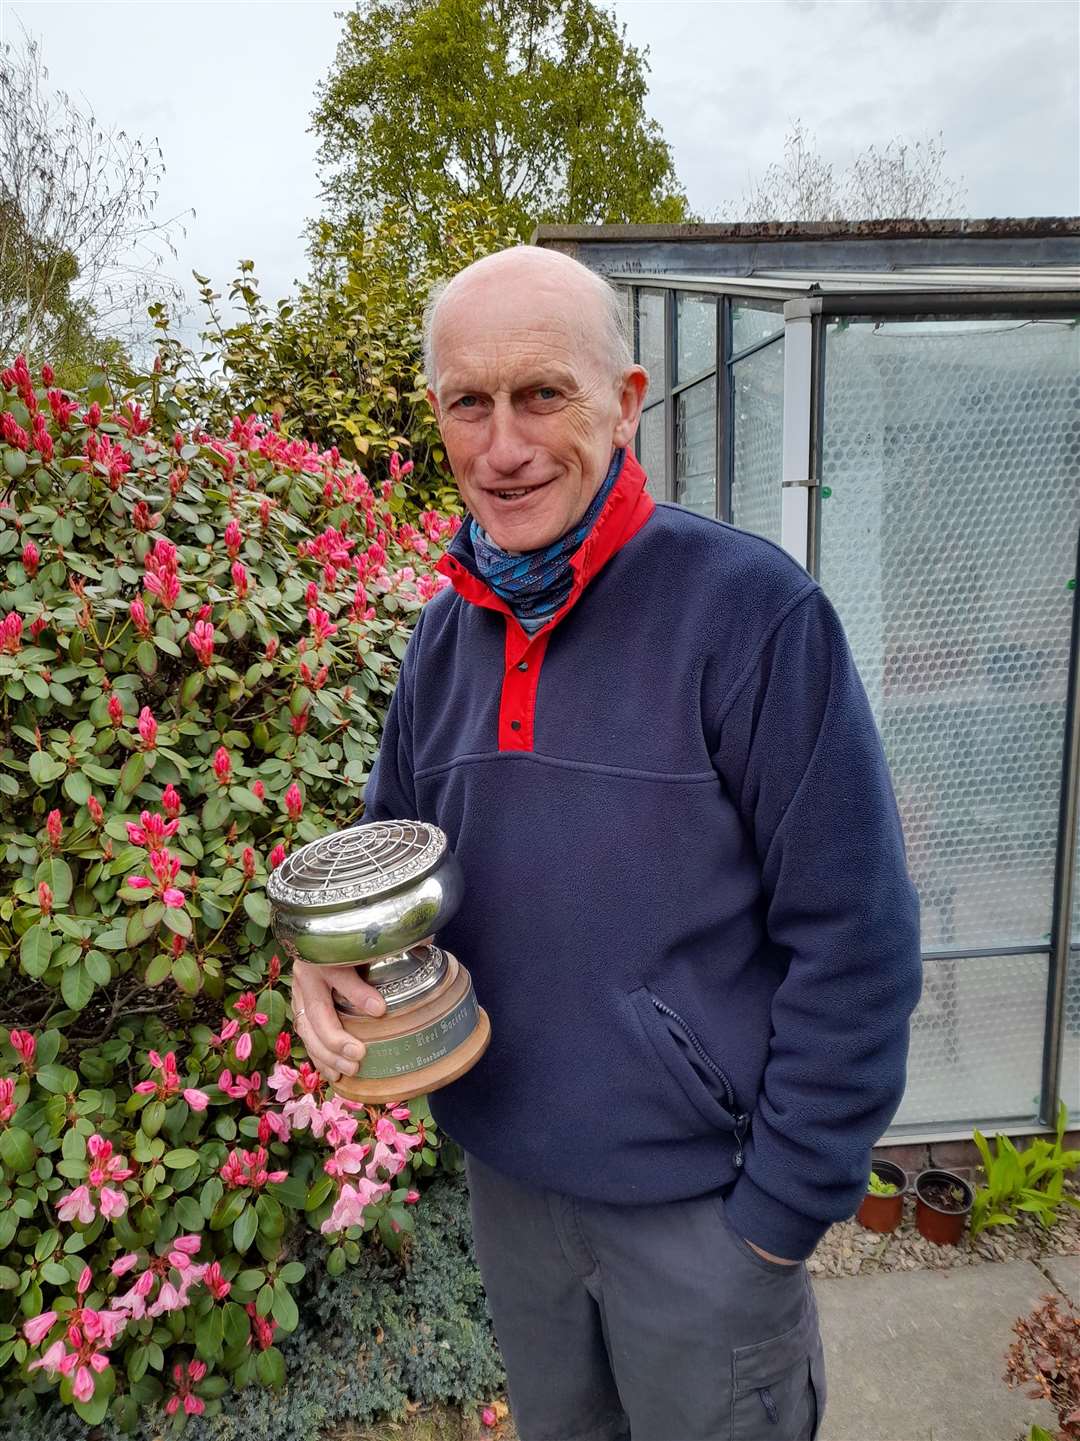 George Duthie, from Elgin, with the Maria Senk Rosebowl.